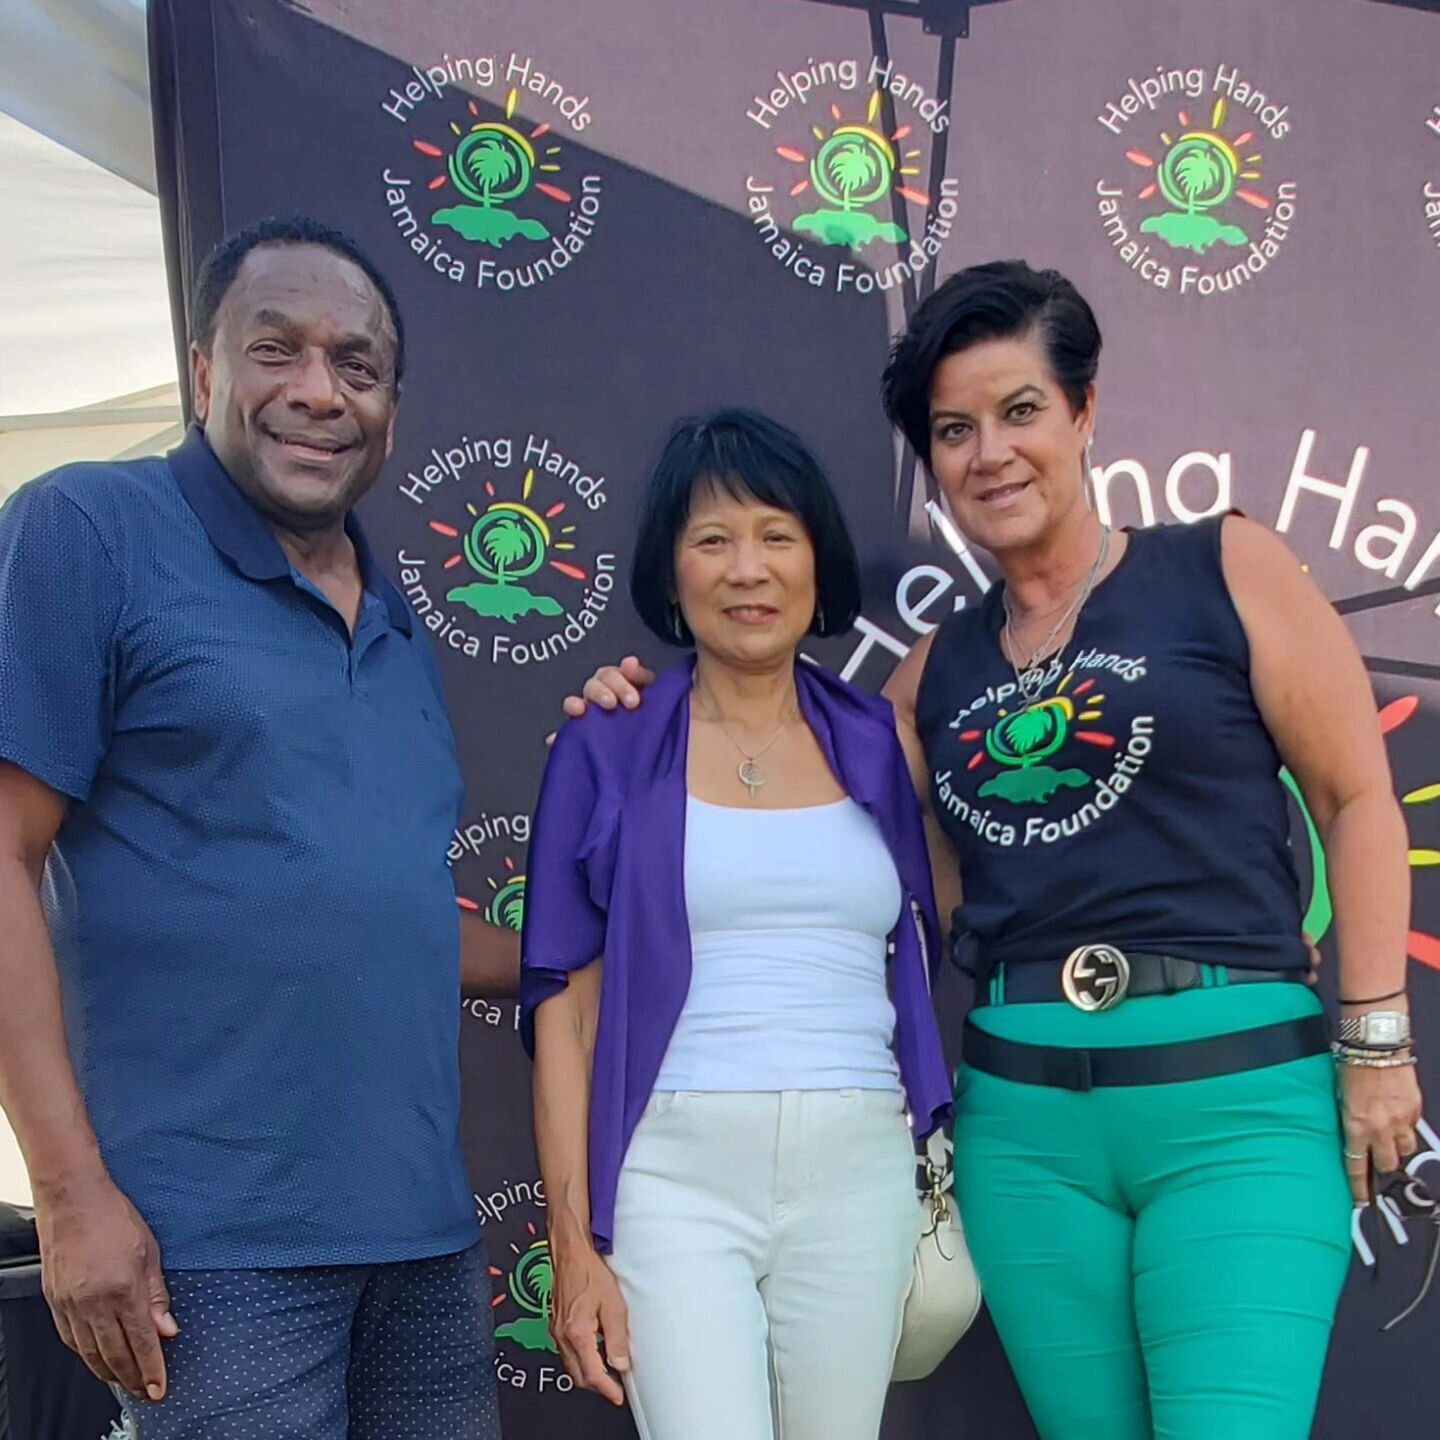 Was great to see councillor_thompson and our new Mayor of Toronto @jerkfestivaltoronto 

Thanks for the support and visiting our @handshelpjamaica booth. 

We will be back tomorrow...come one call all! 

#Participate #Educate #Elevate